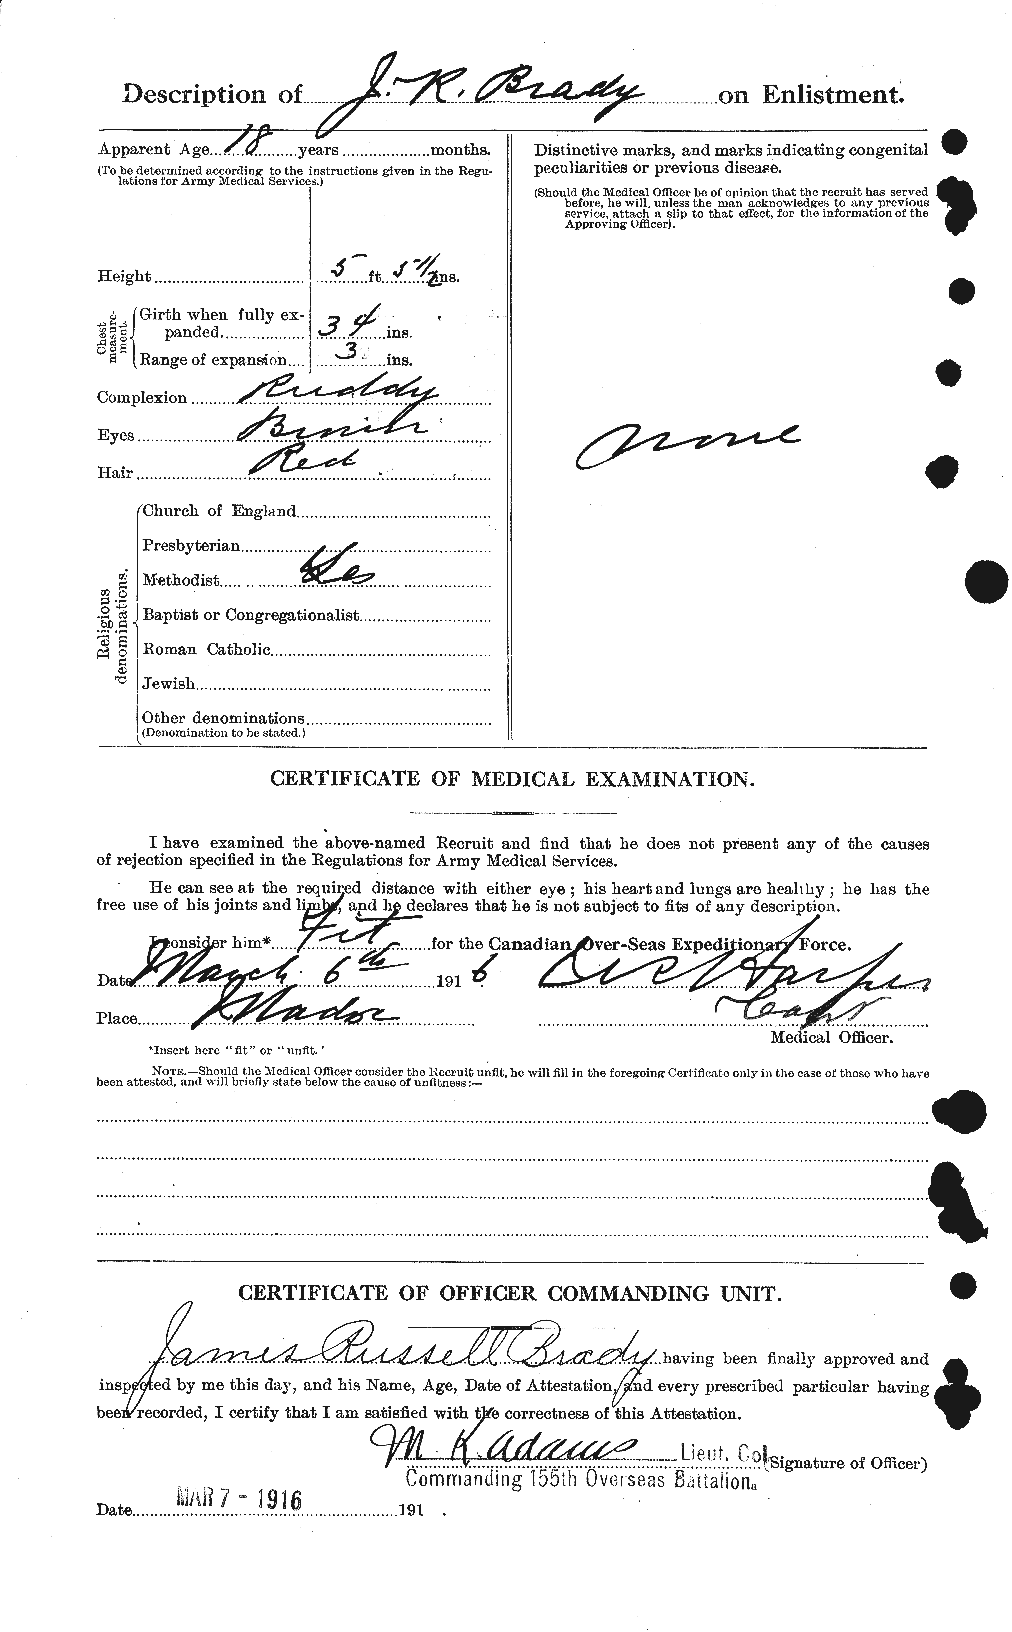 Personnel Records of the First World War - CEF 257188b